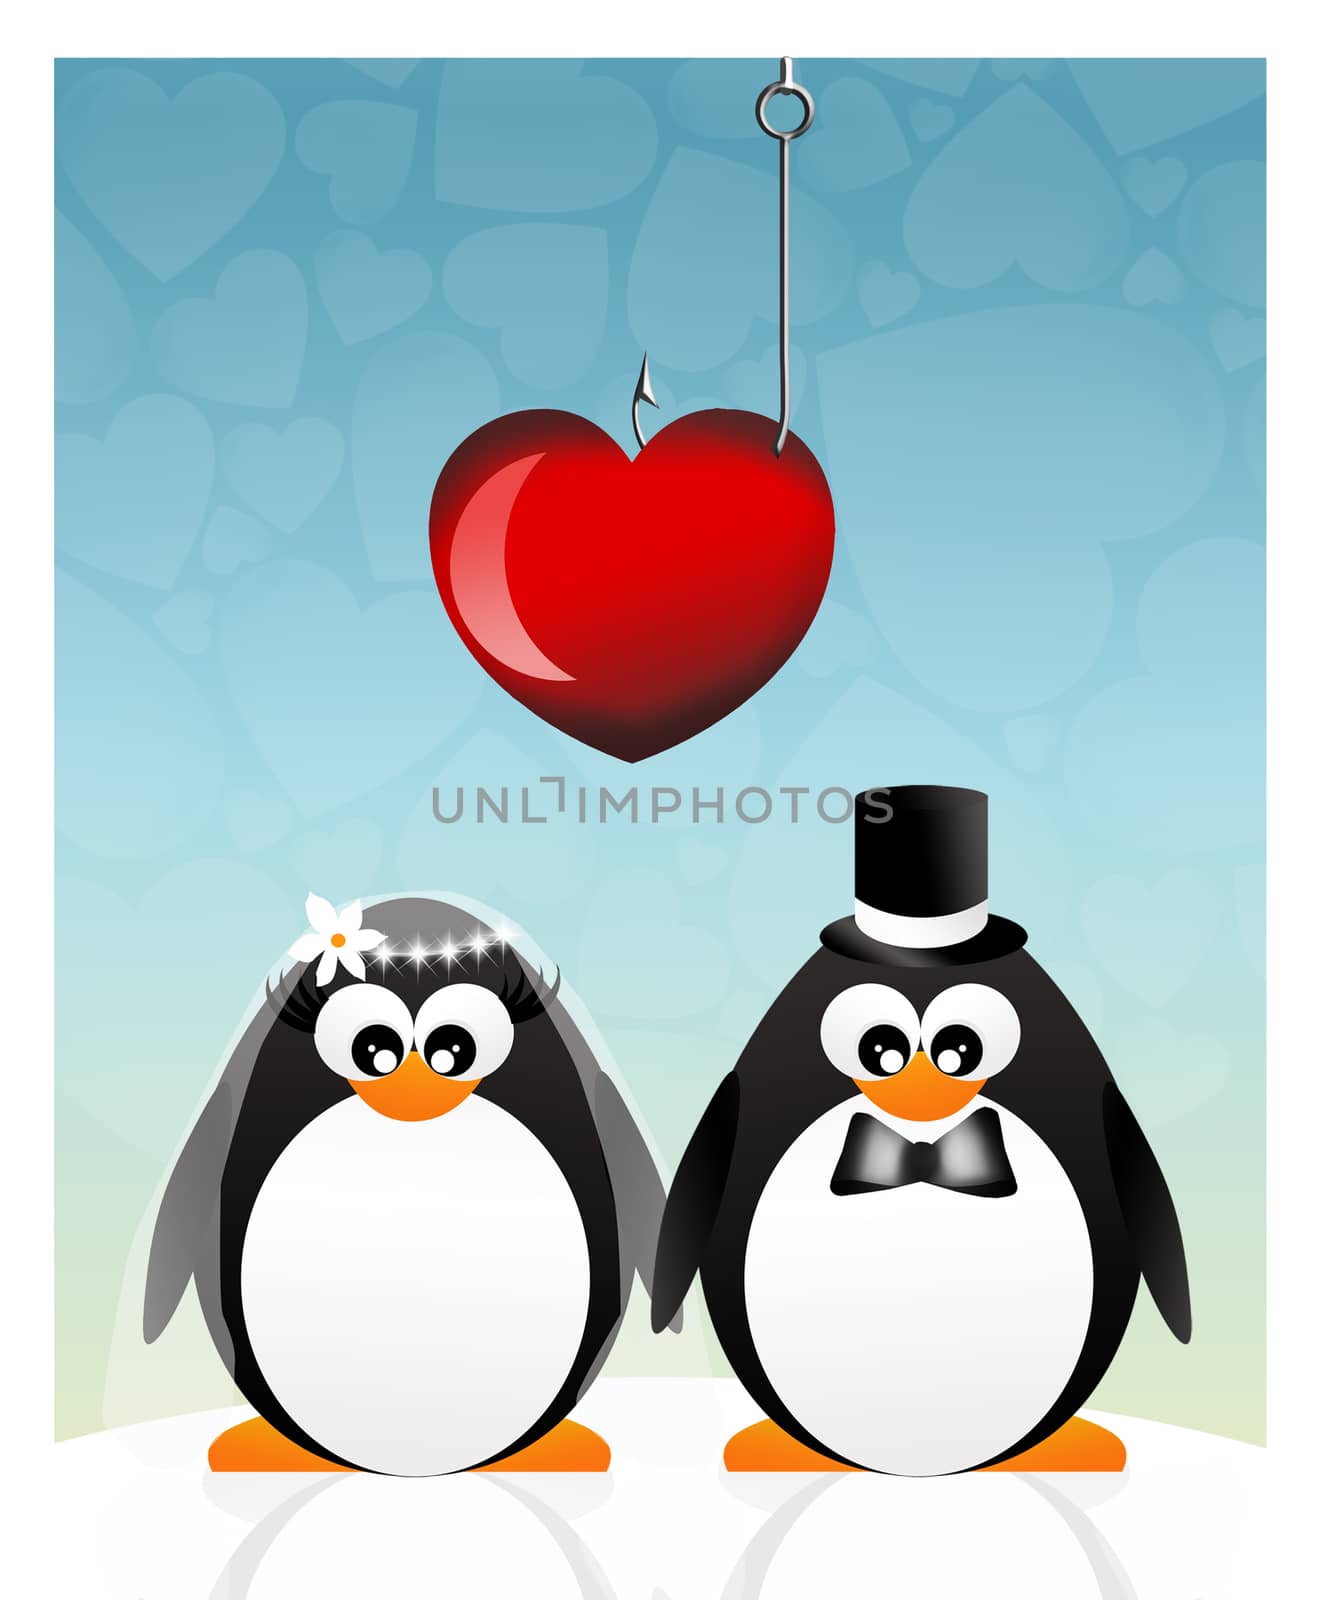 Penguins in love by adrenalina